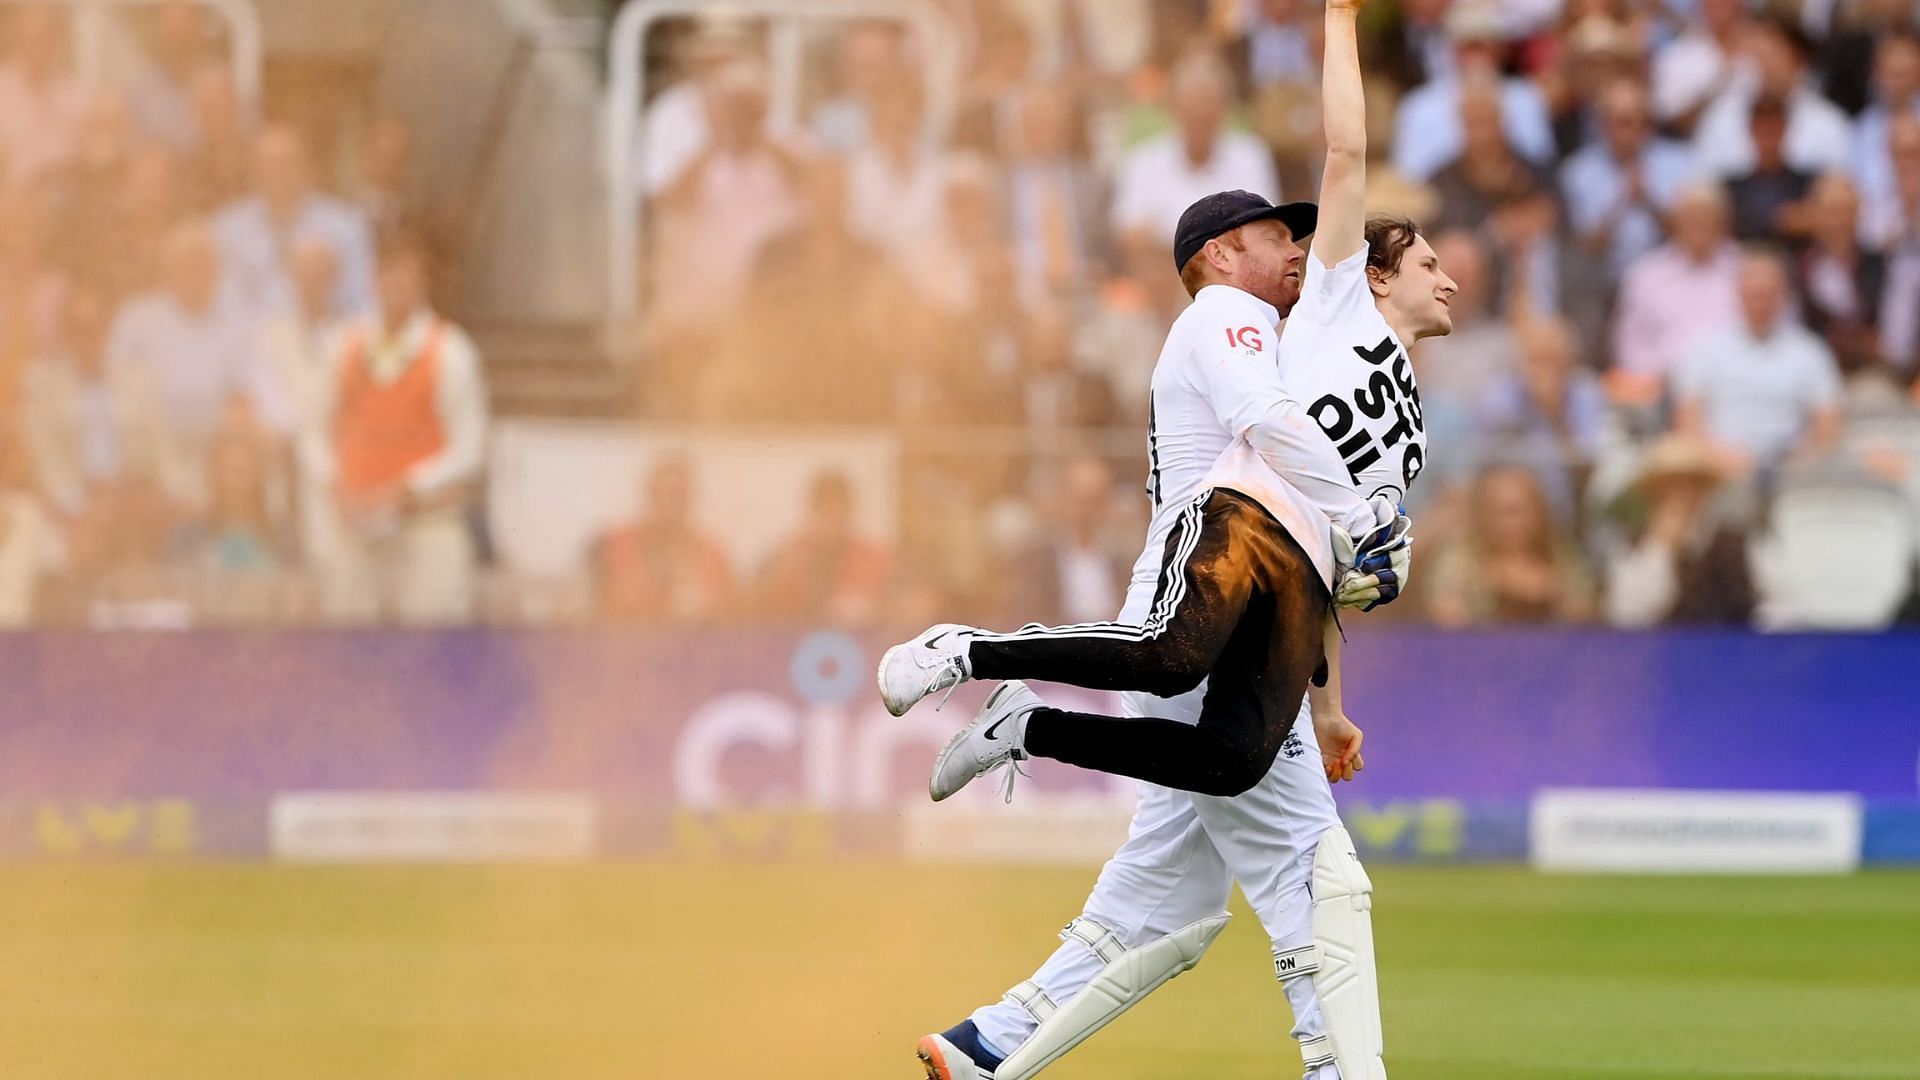 Jonny Bairstow carrying one of the pitch invaders during the ongoing Lord